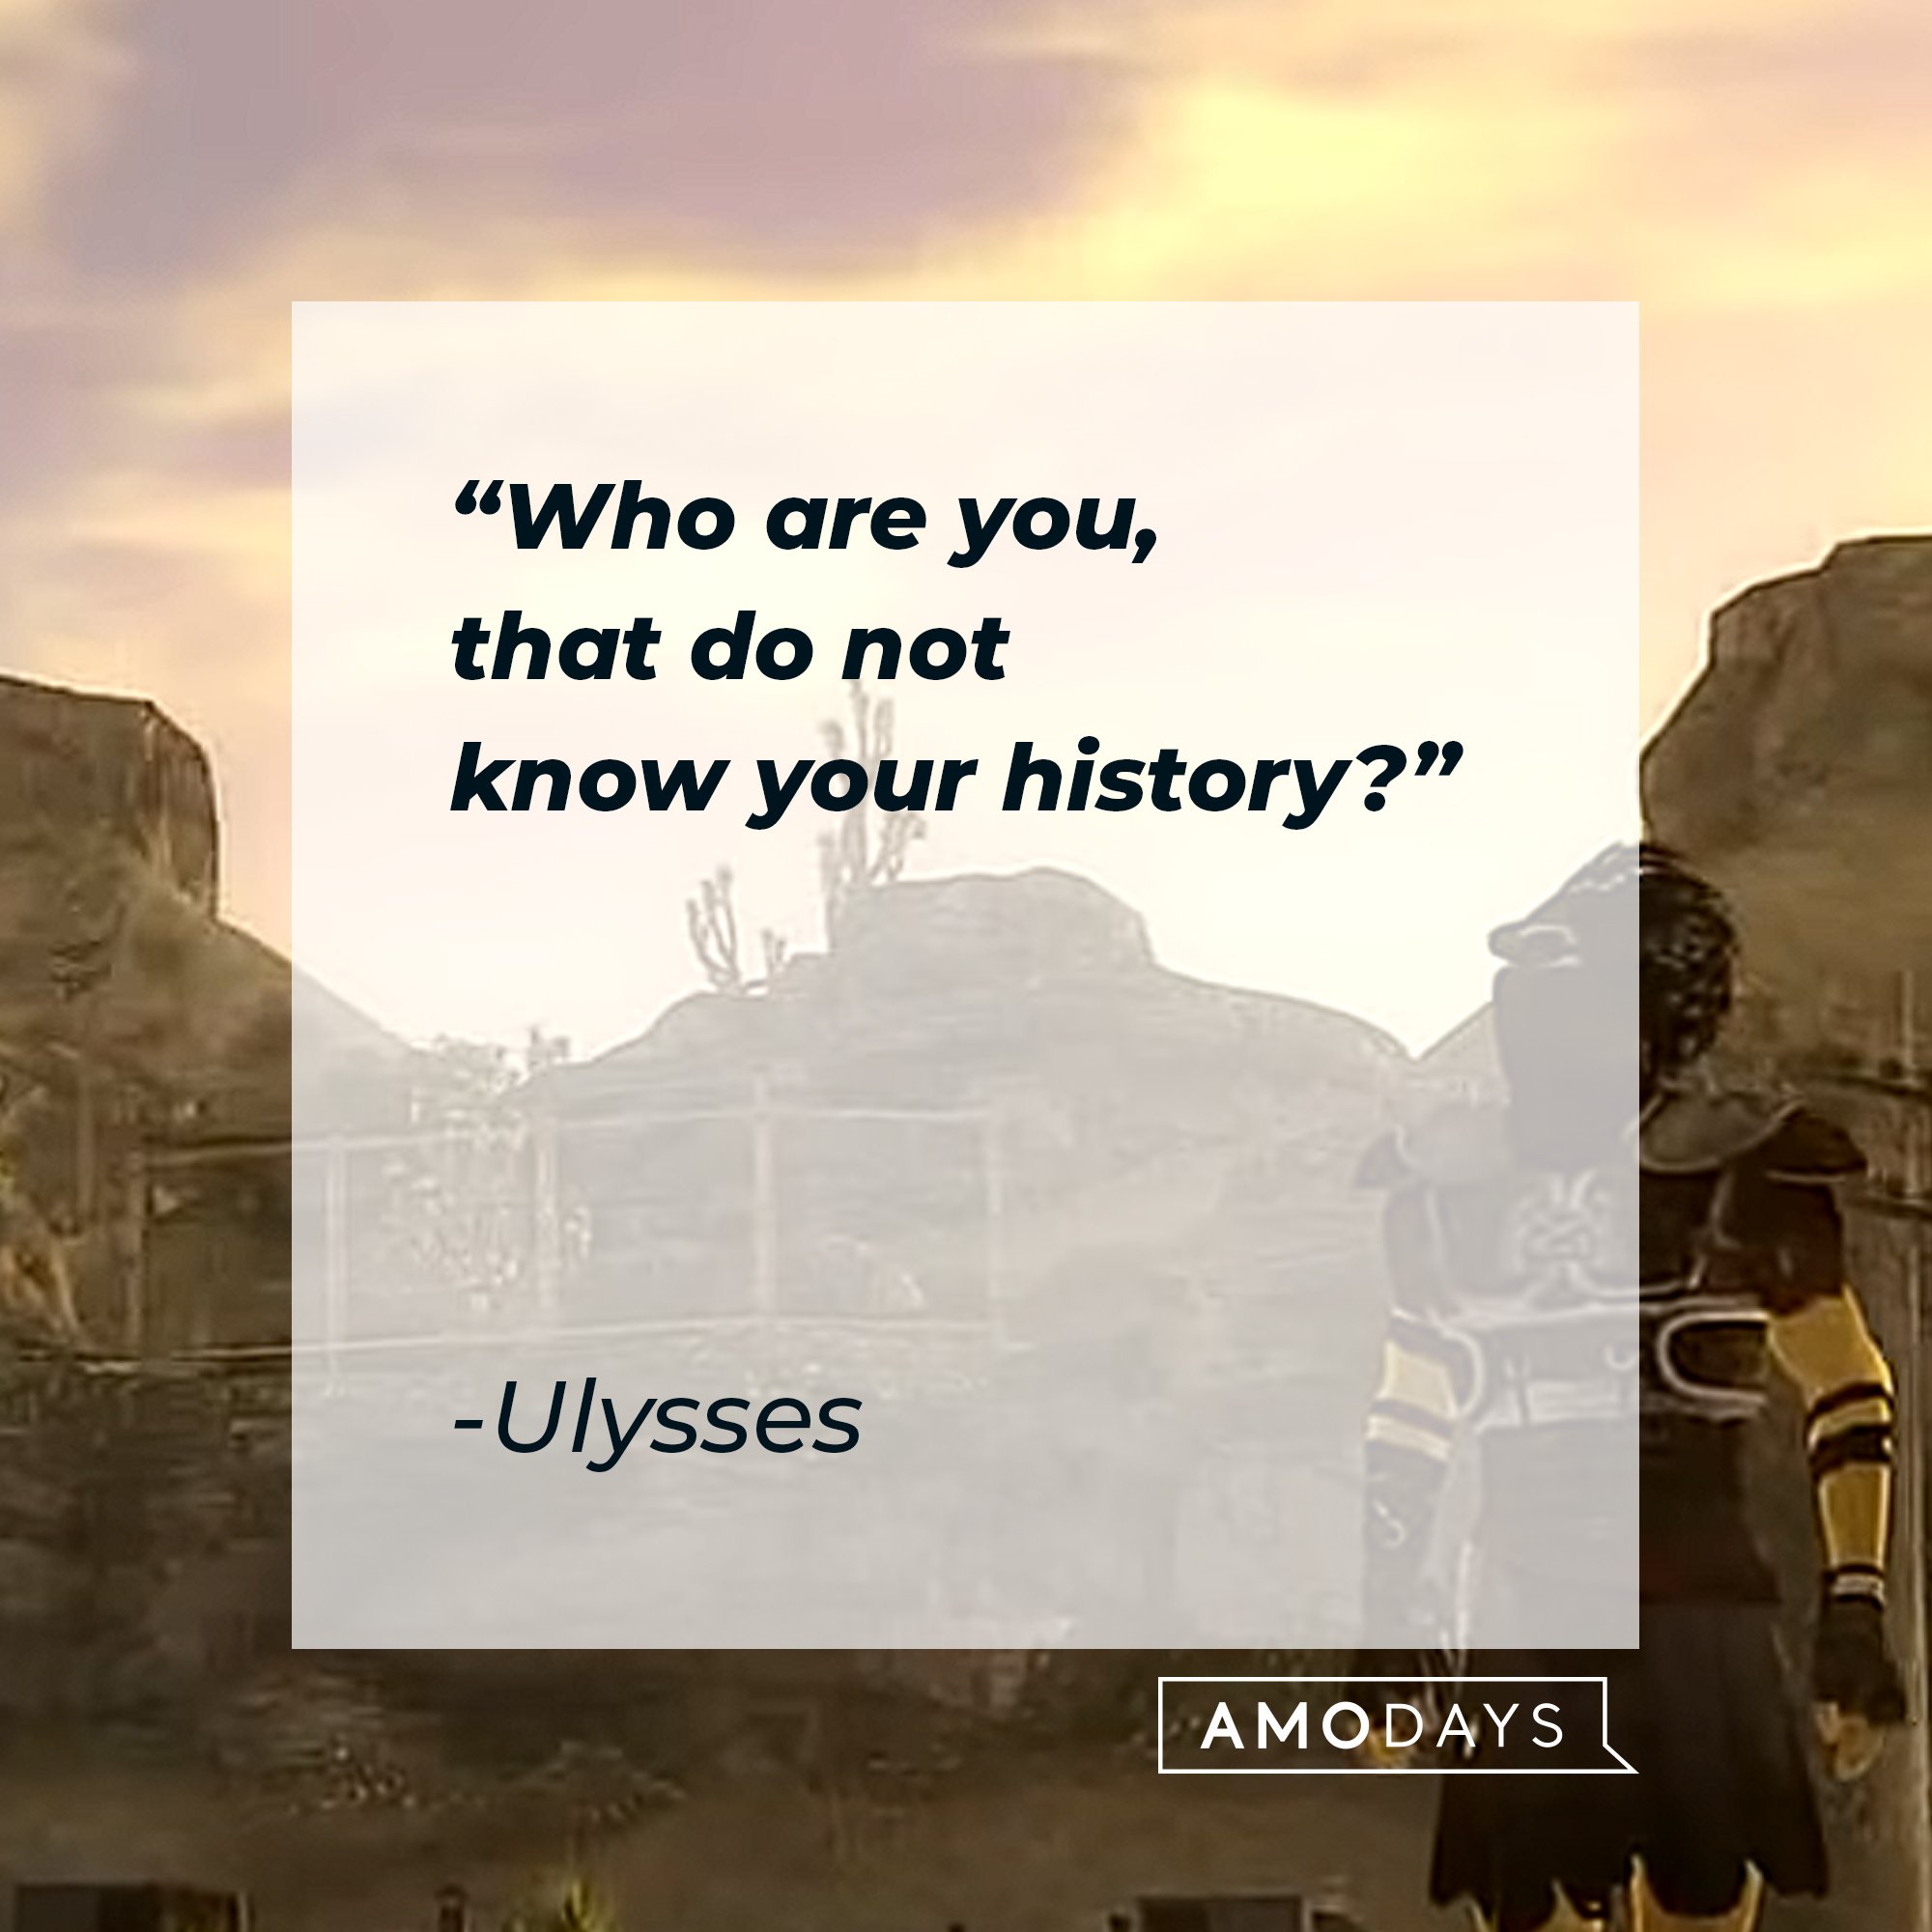 Ulysses’ quote: "Who are you, that do not know your history?" | Image: AmoDays